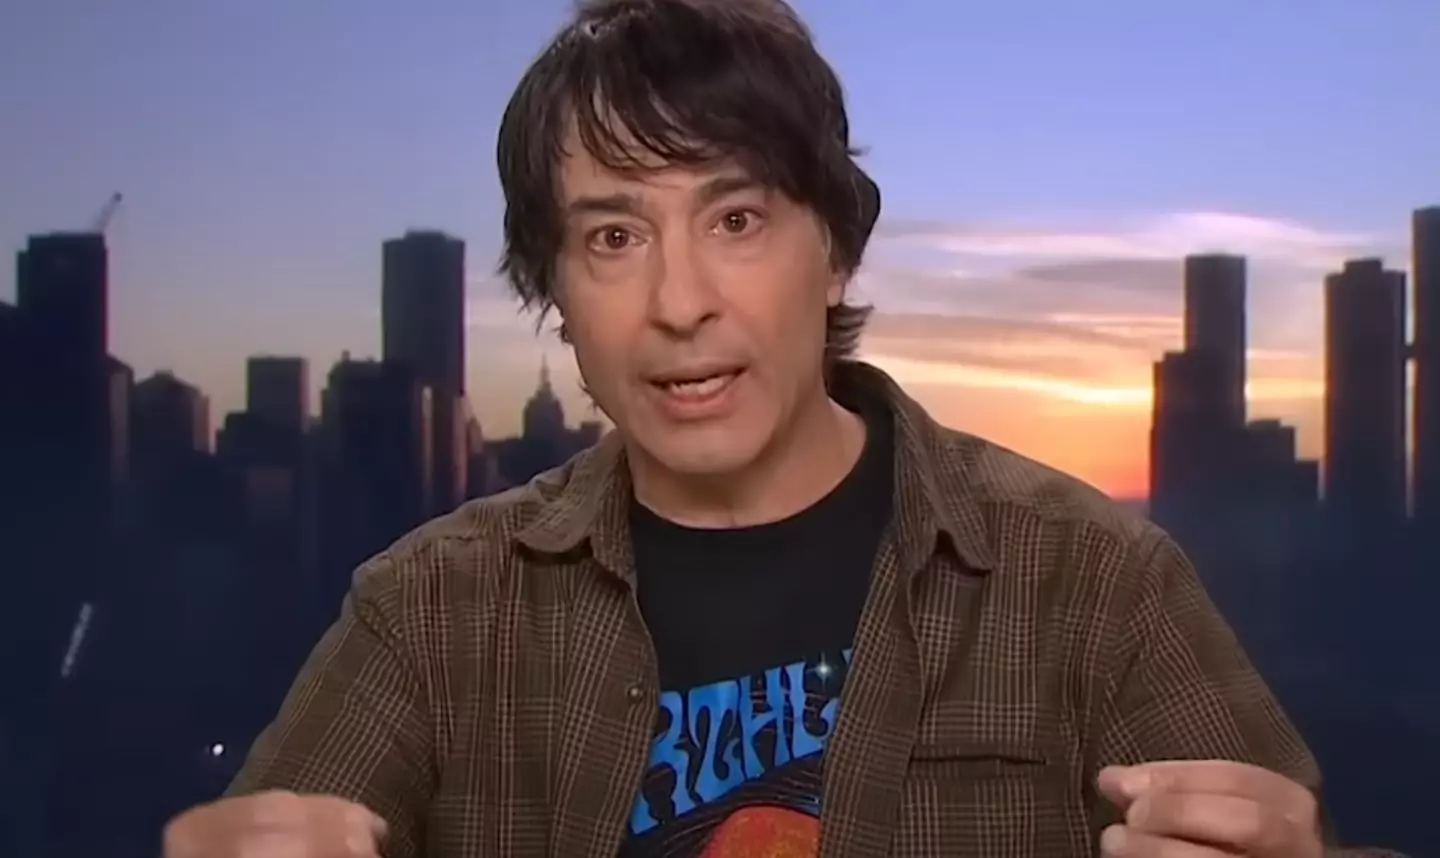 Arj Barker has issued an apology to the mom. (9 News Australia)